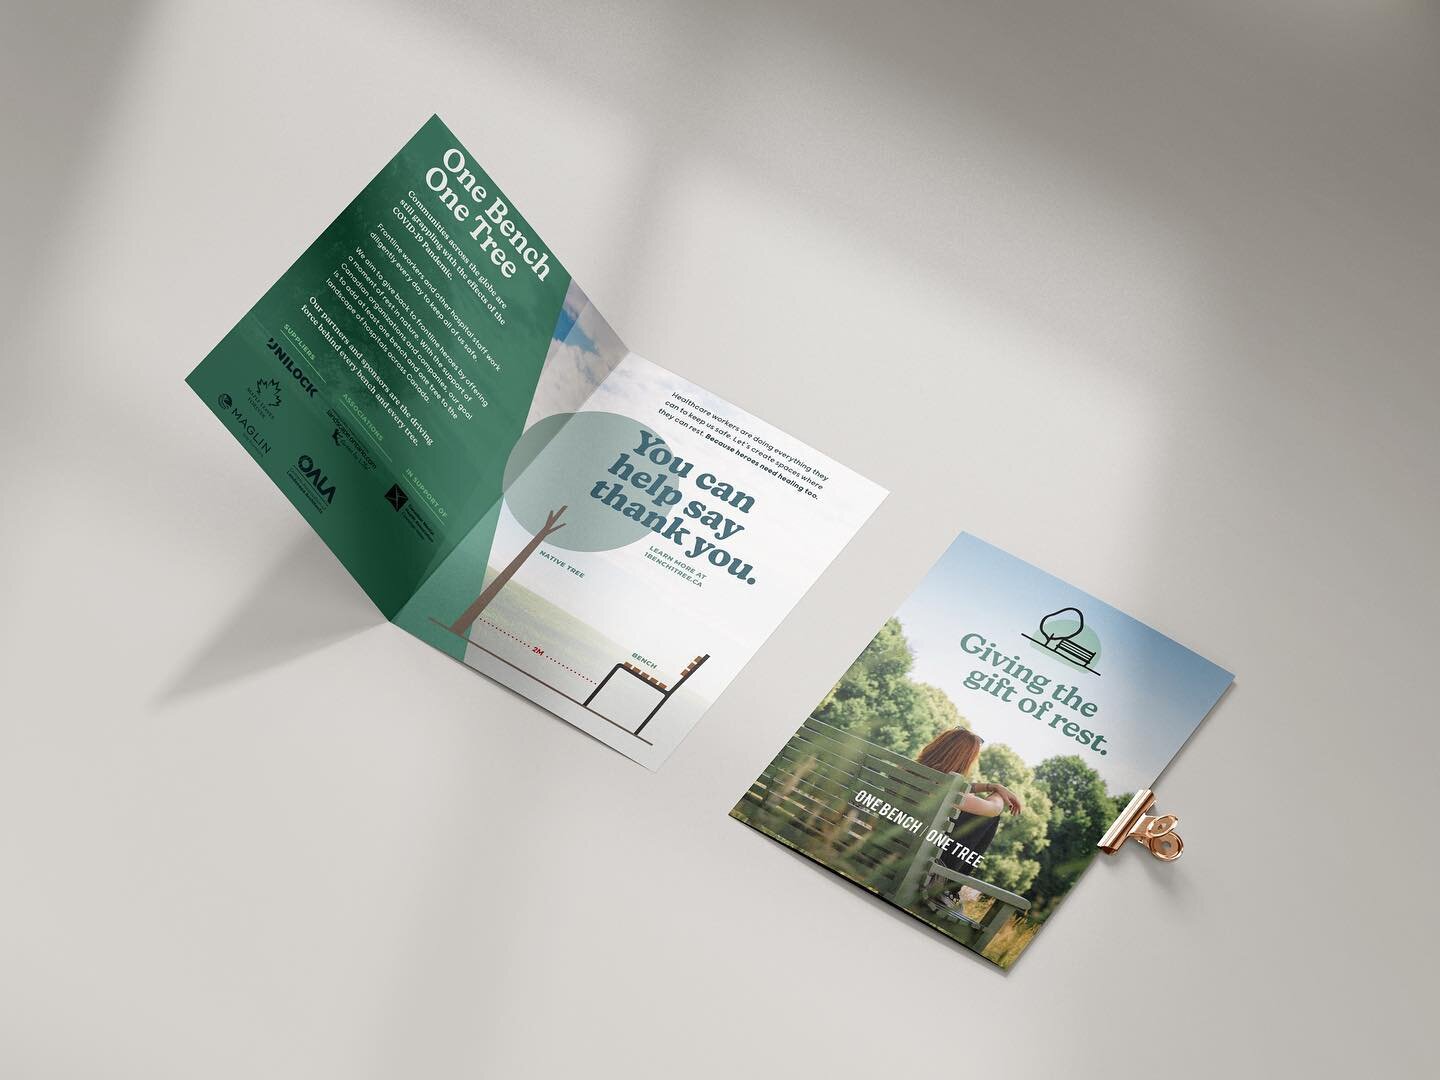 On behalf of 1B1T, we would like to give a shoutout to Capture Studio for designing such incredible brochures. Thank you for helping us best represent our mission!

To see more of their fantastic work and design expertise, please check out their acco